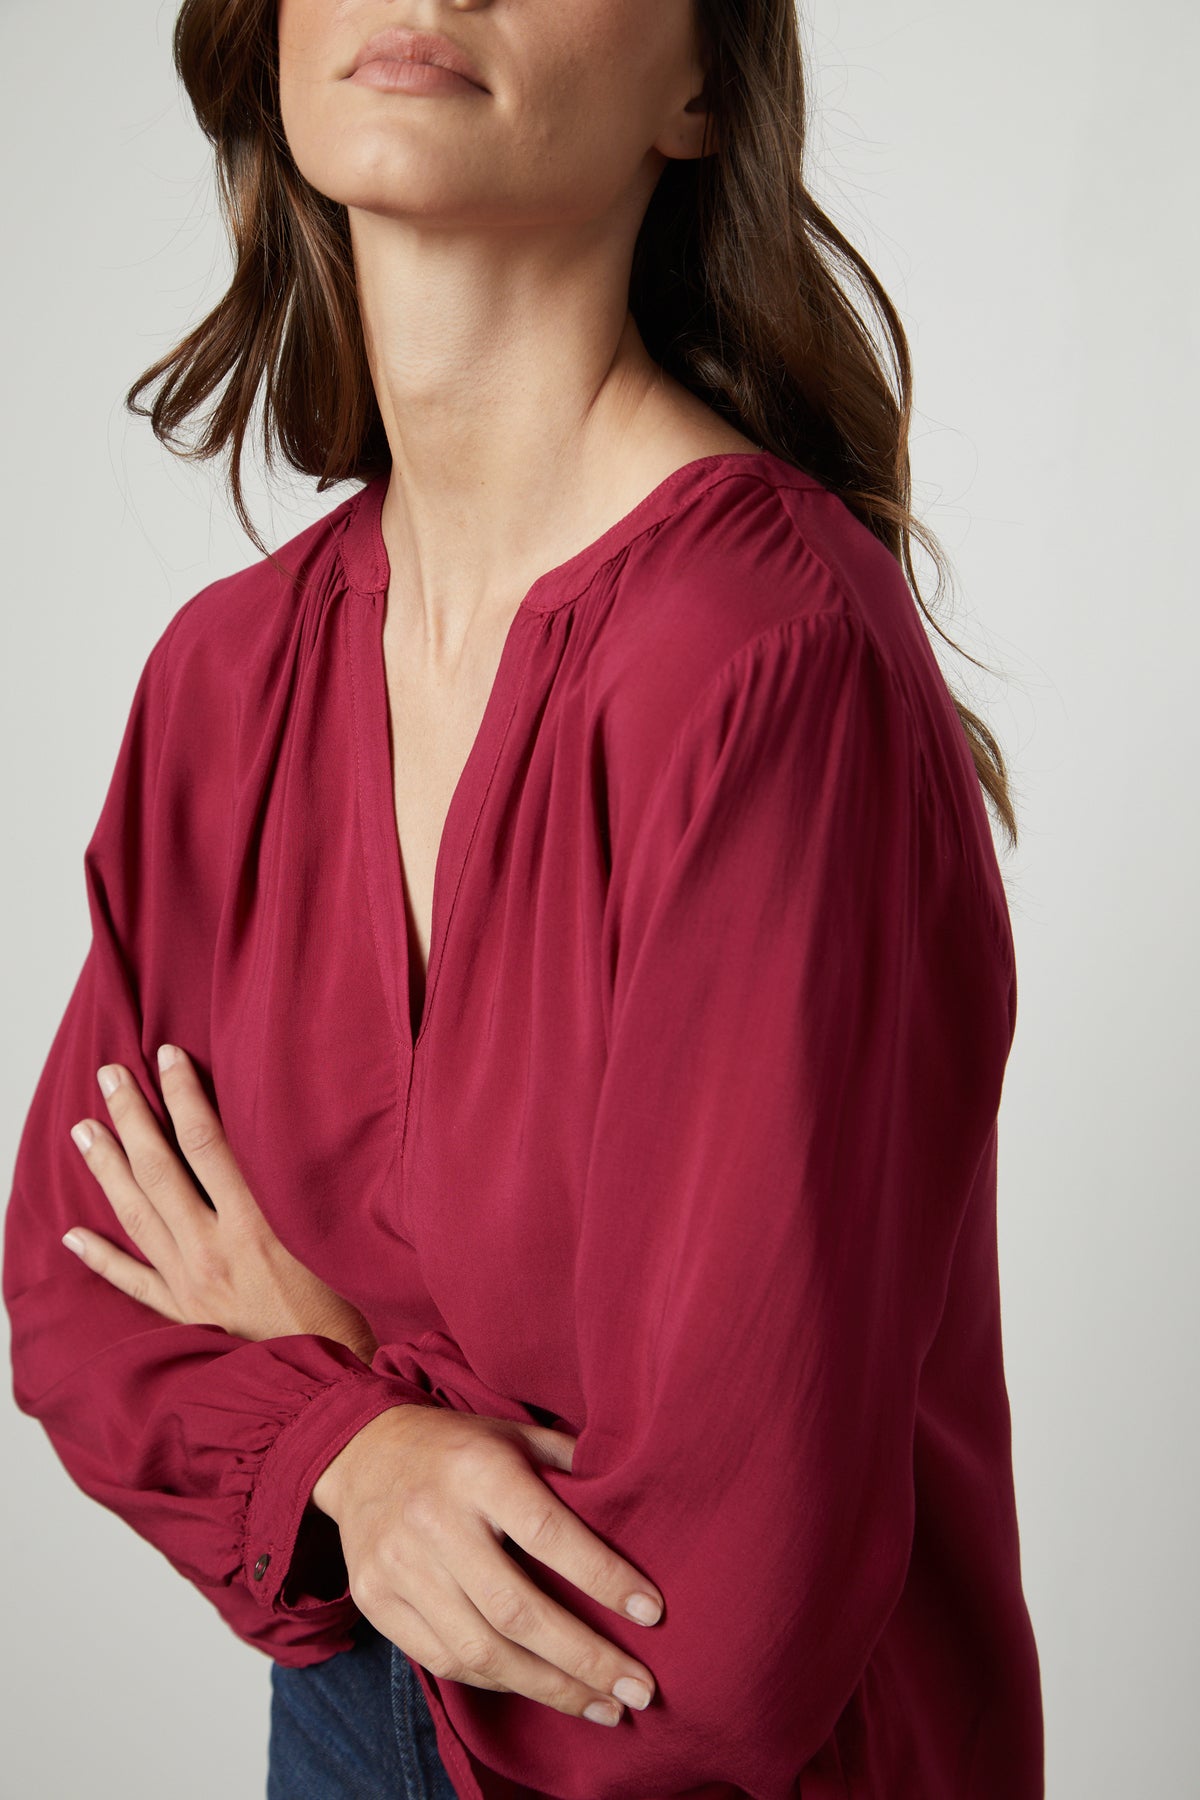 A woman wearing a Velvet by Graham & Spencer Posie Split Neck Blouse and jeans.-26861471236289